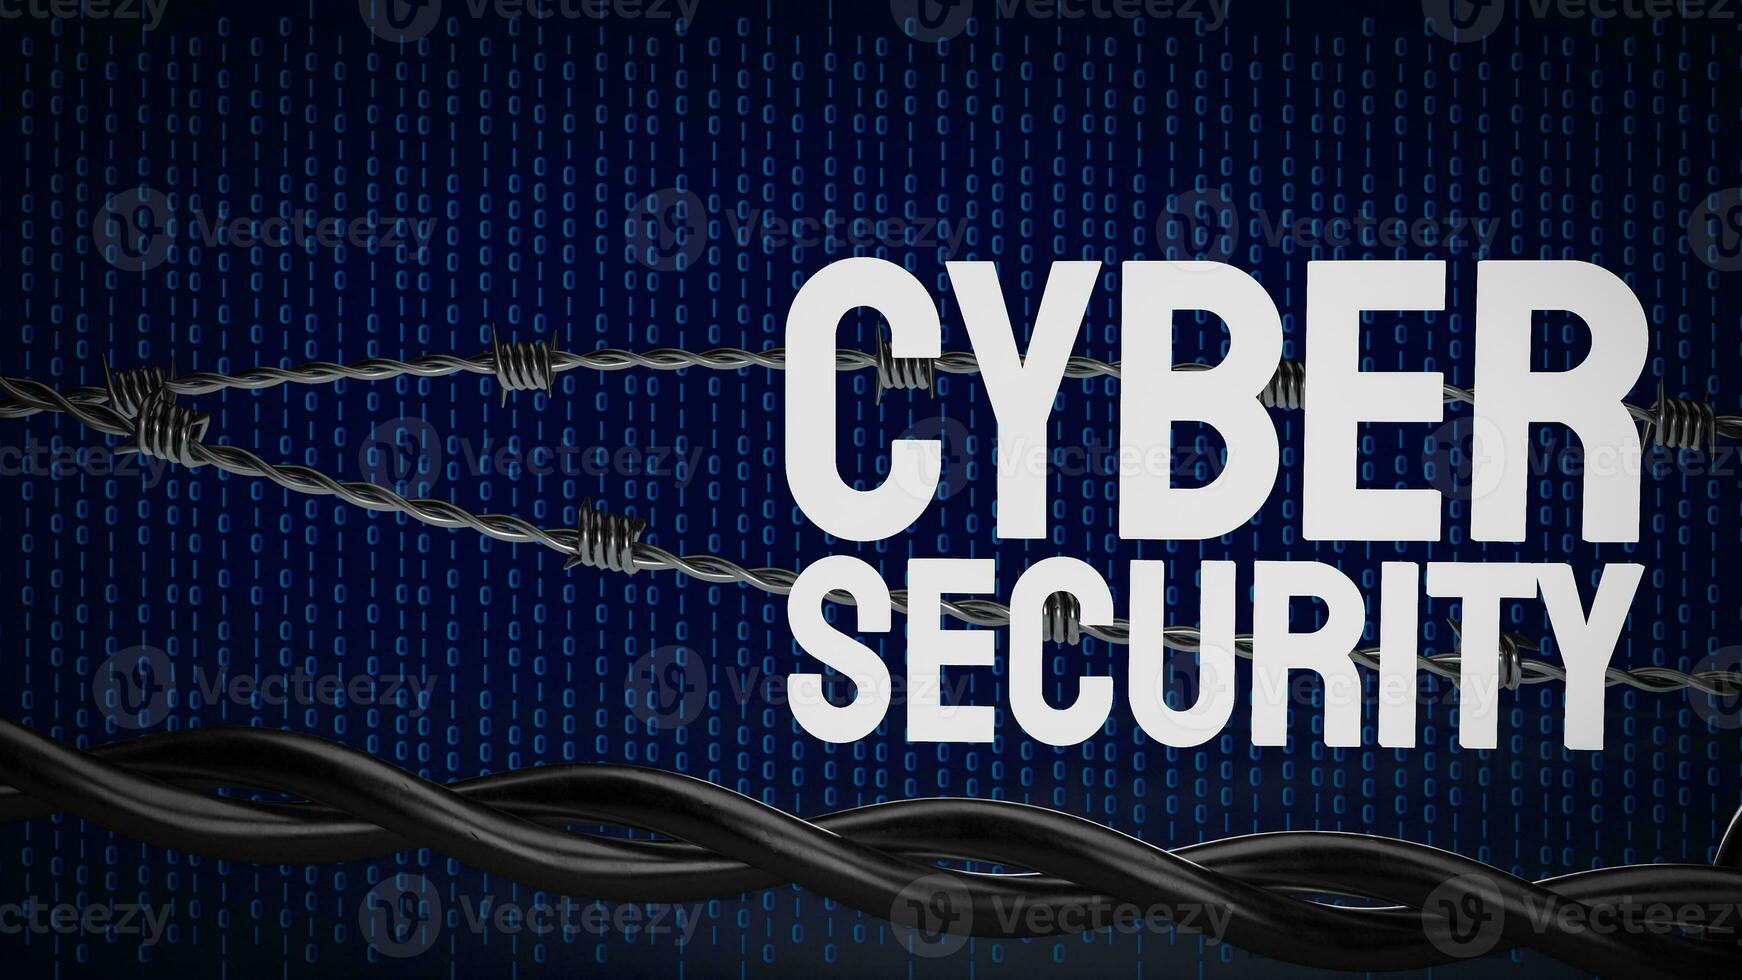 The cyber security for technology and it concept 3d rendering. photo